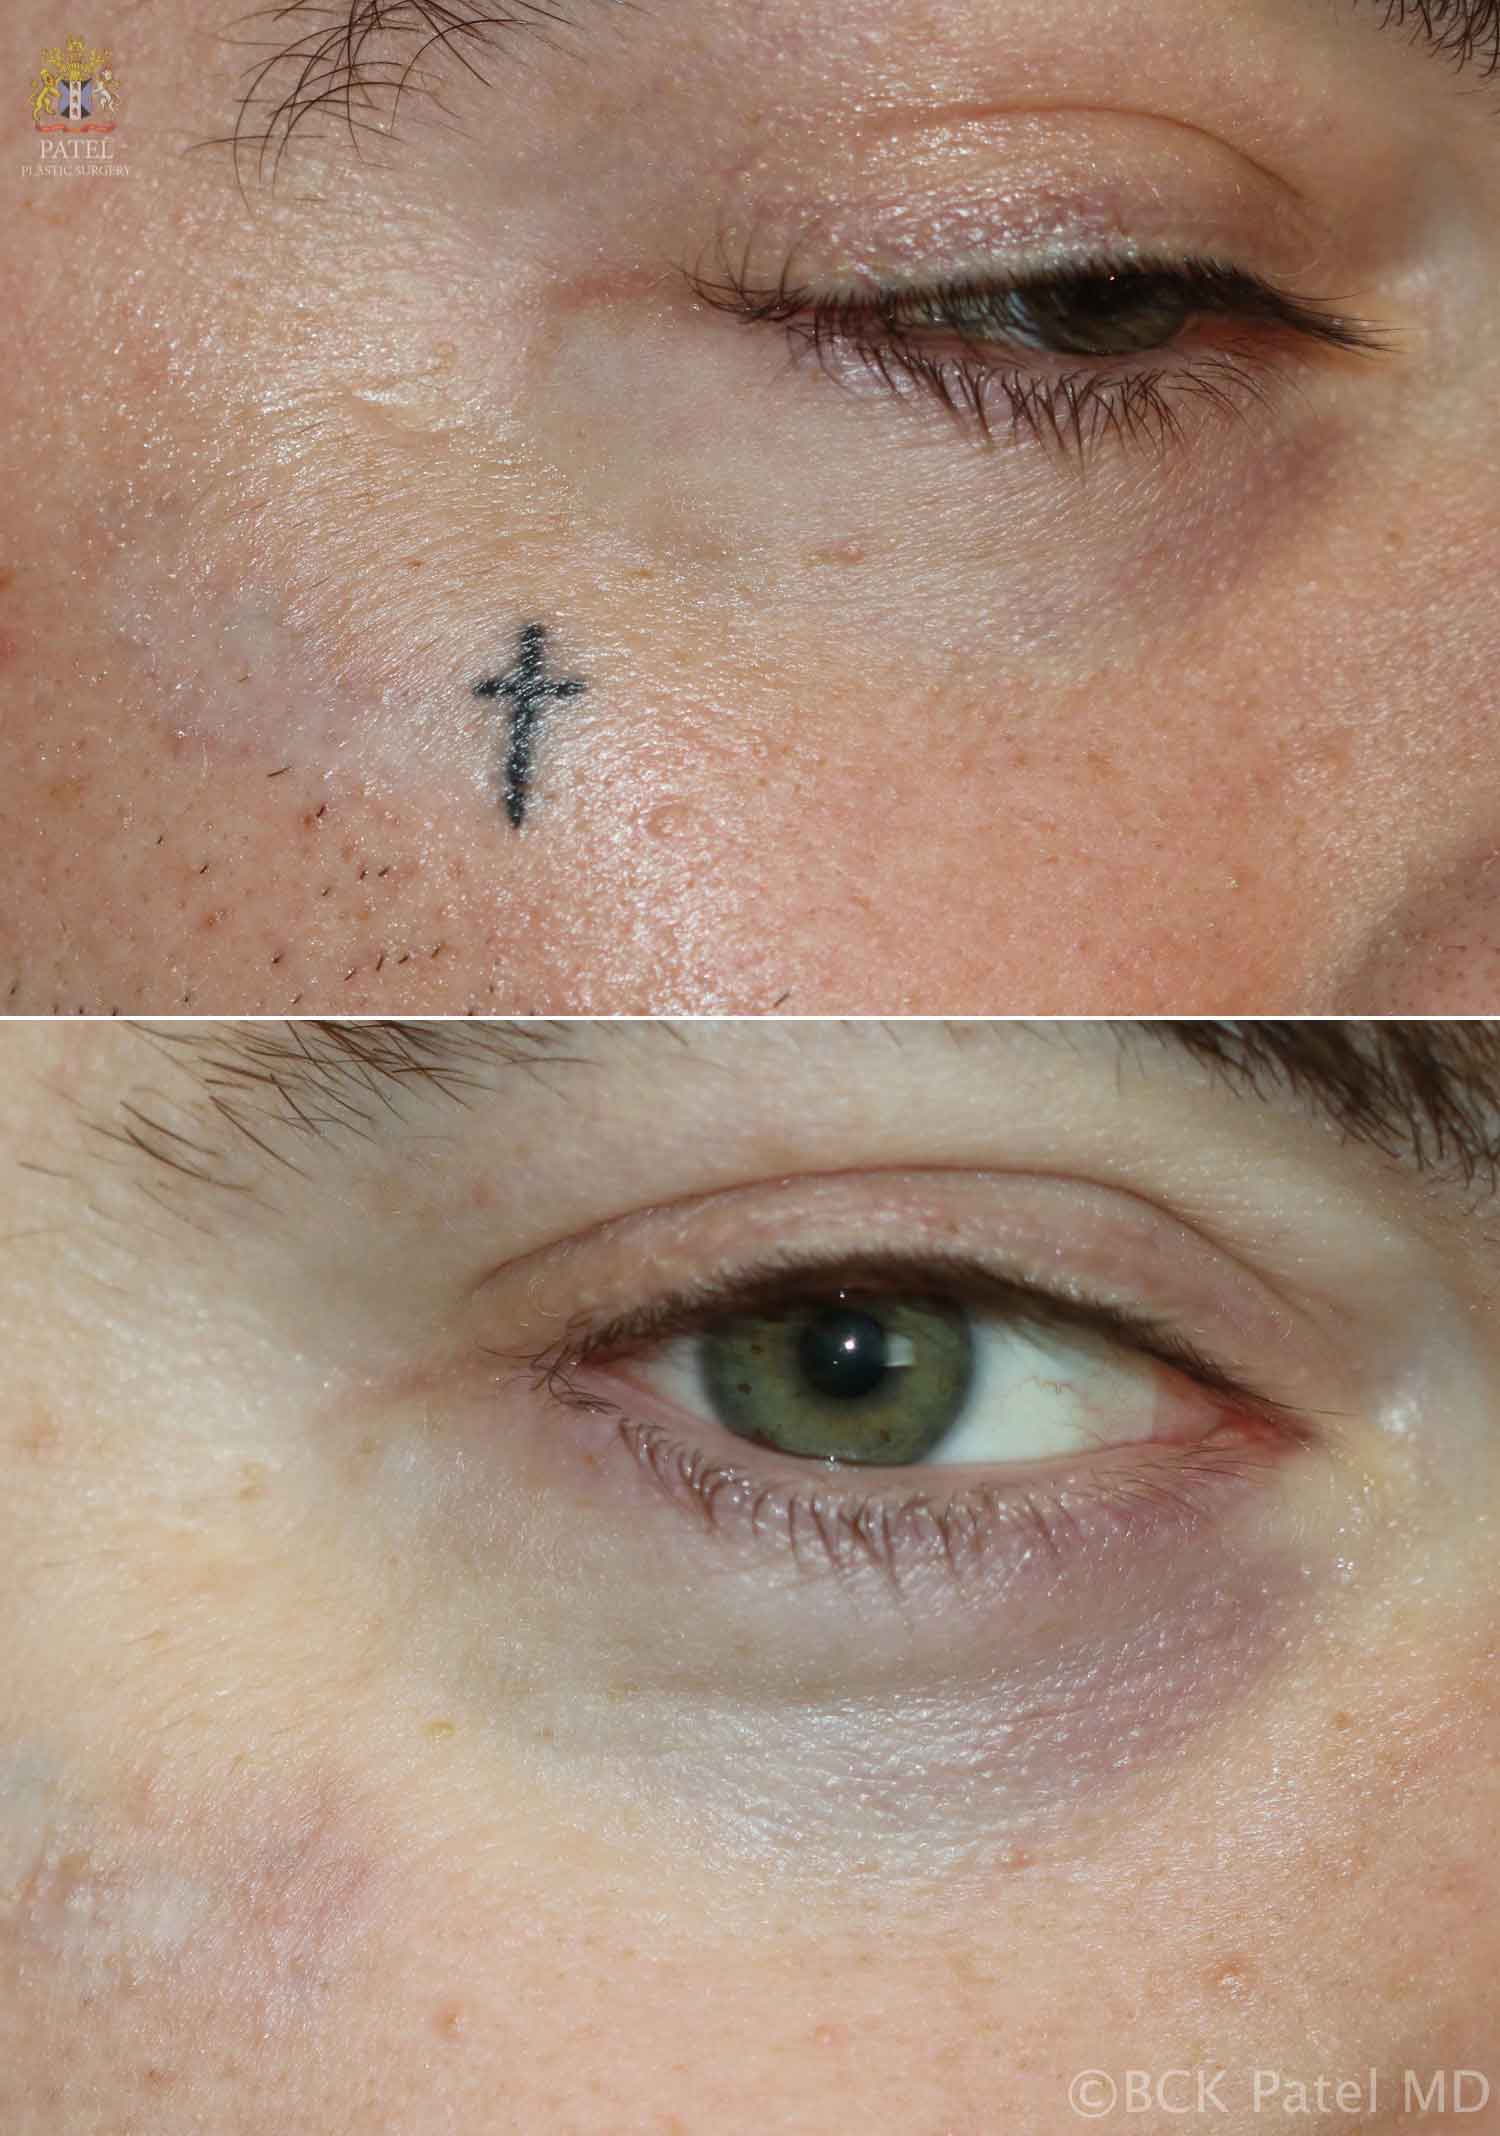 Laser removal of a dark tattoo by Dr. Bhupendra Patel